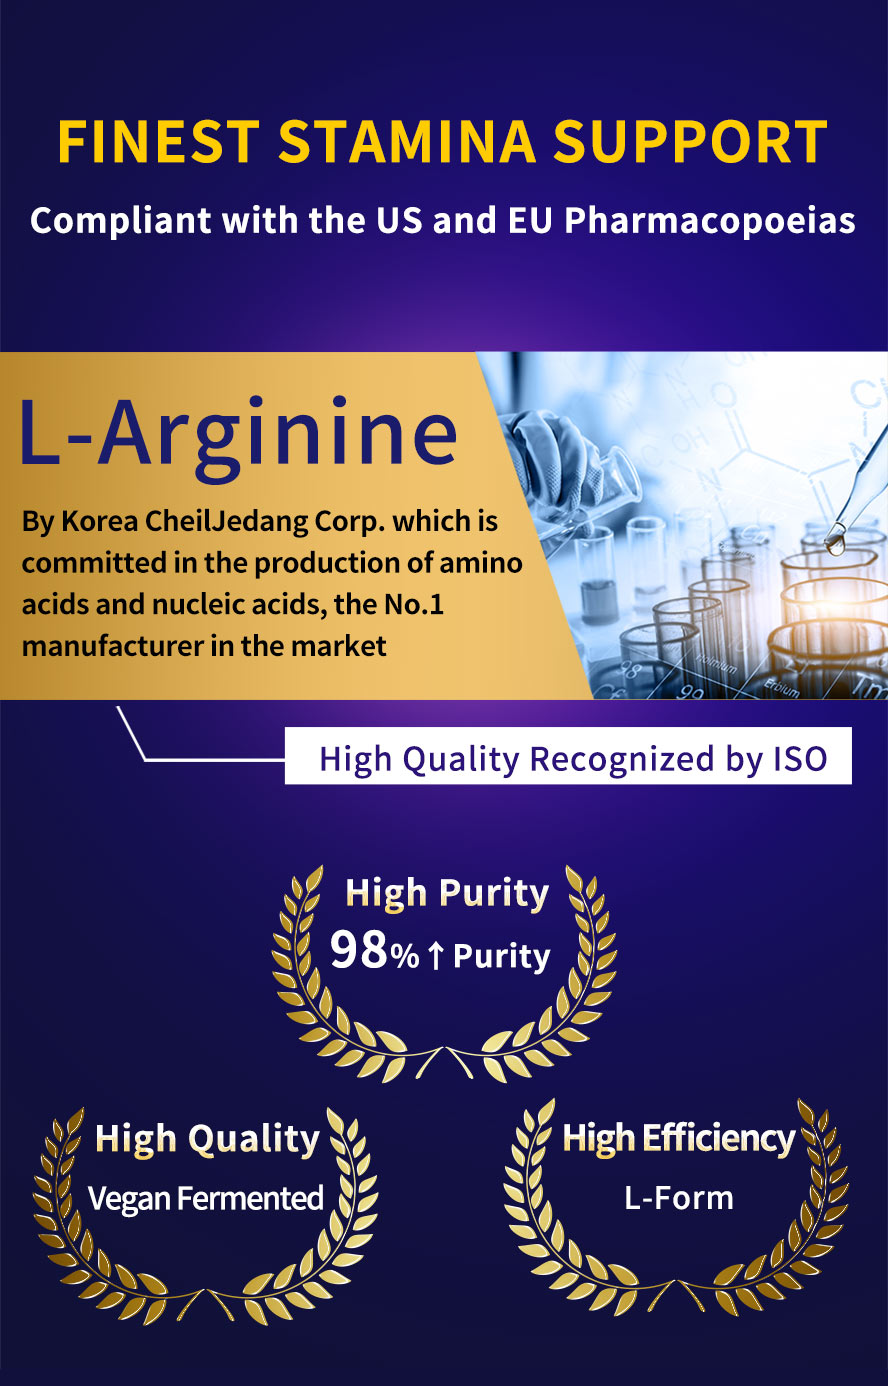 L-Arginine in UNIQMAN is sourced from a top manufacturer of amino acids and nucleic acids, ensuring high quality and purity of 98%. It is derived from vegan fermentation, the L-Form arginine used is highly efficient and complies with the standards set by the US and EU Pharmacopoeias.